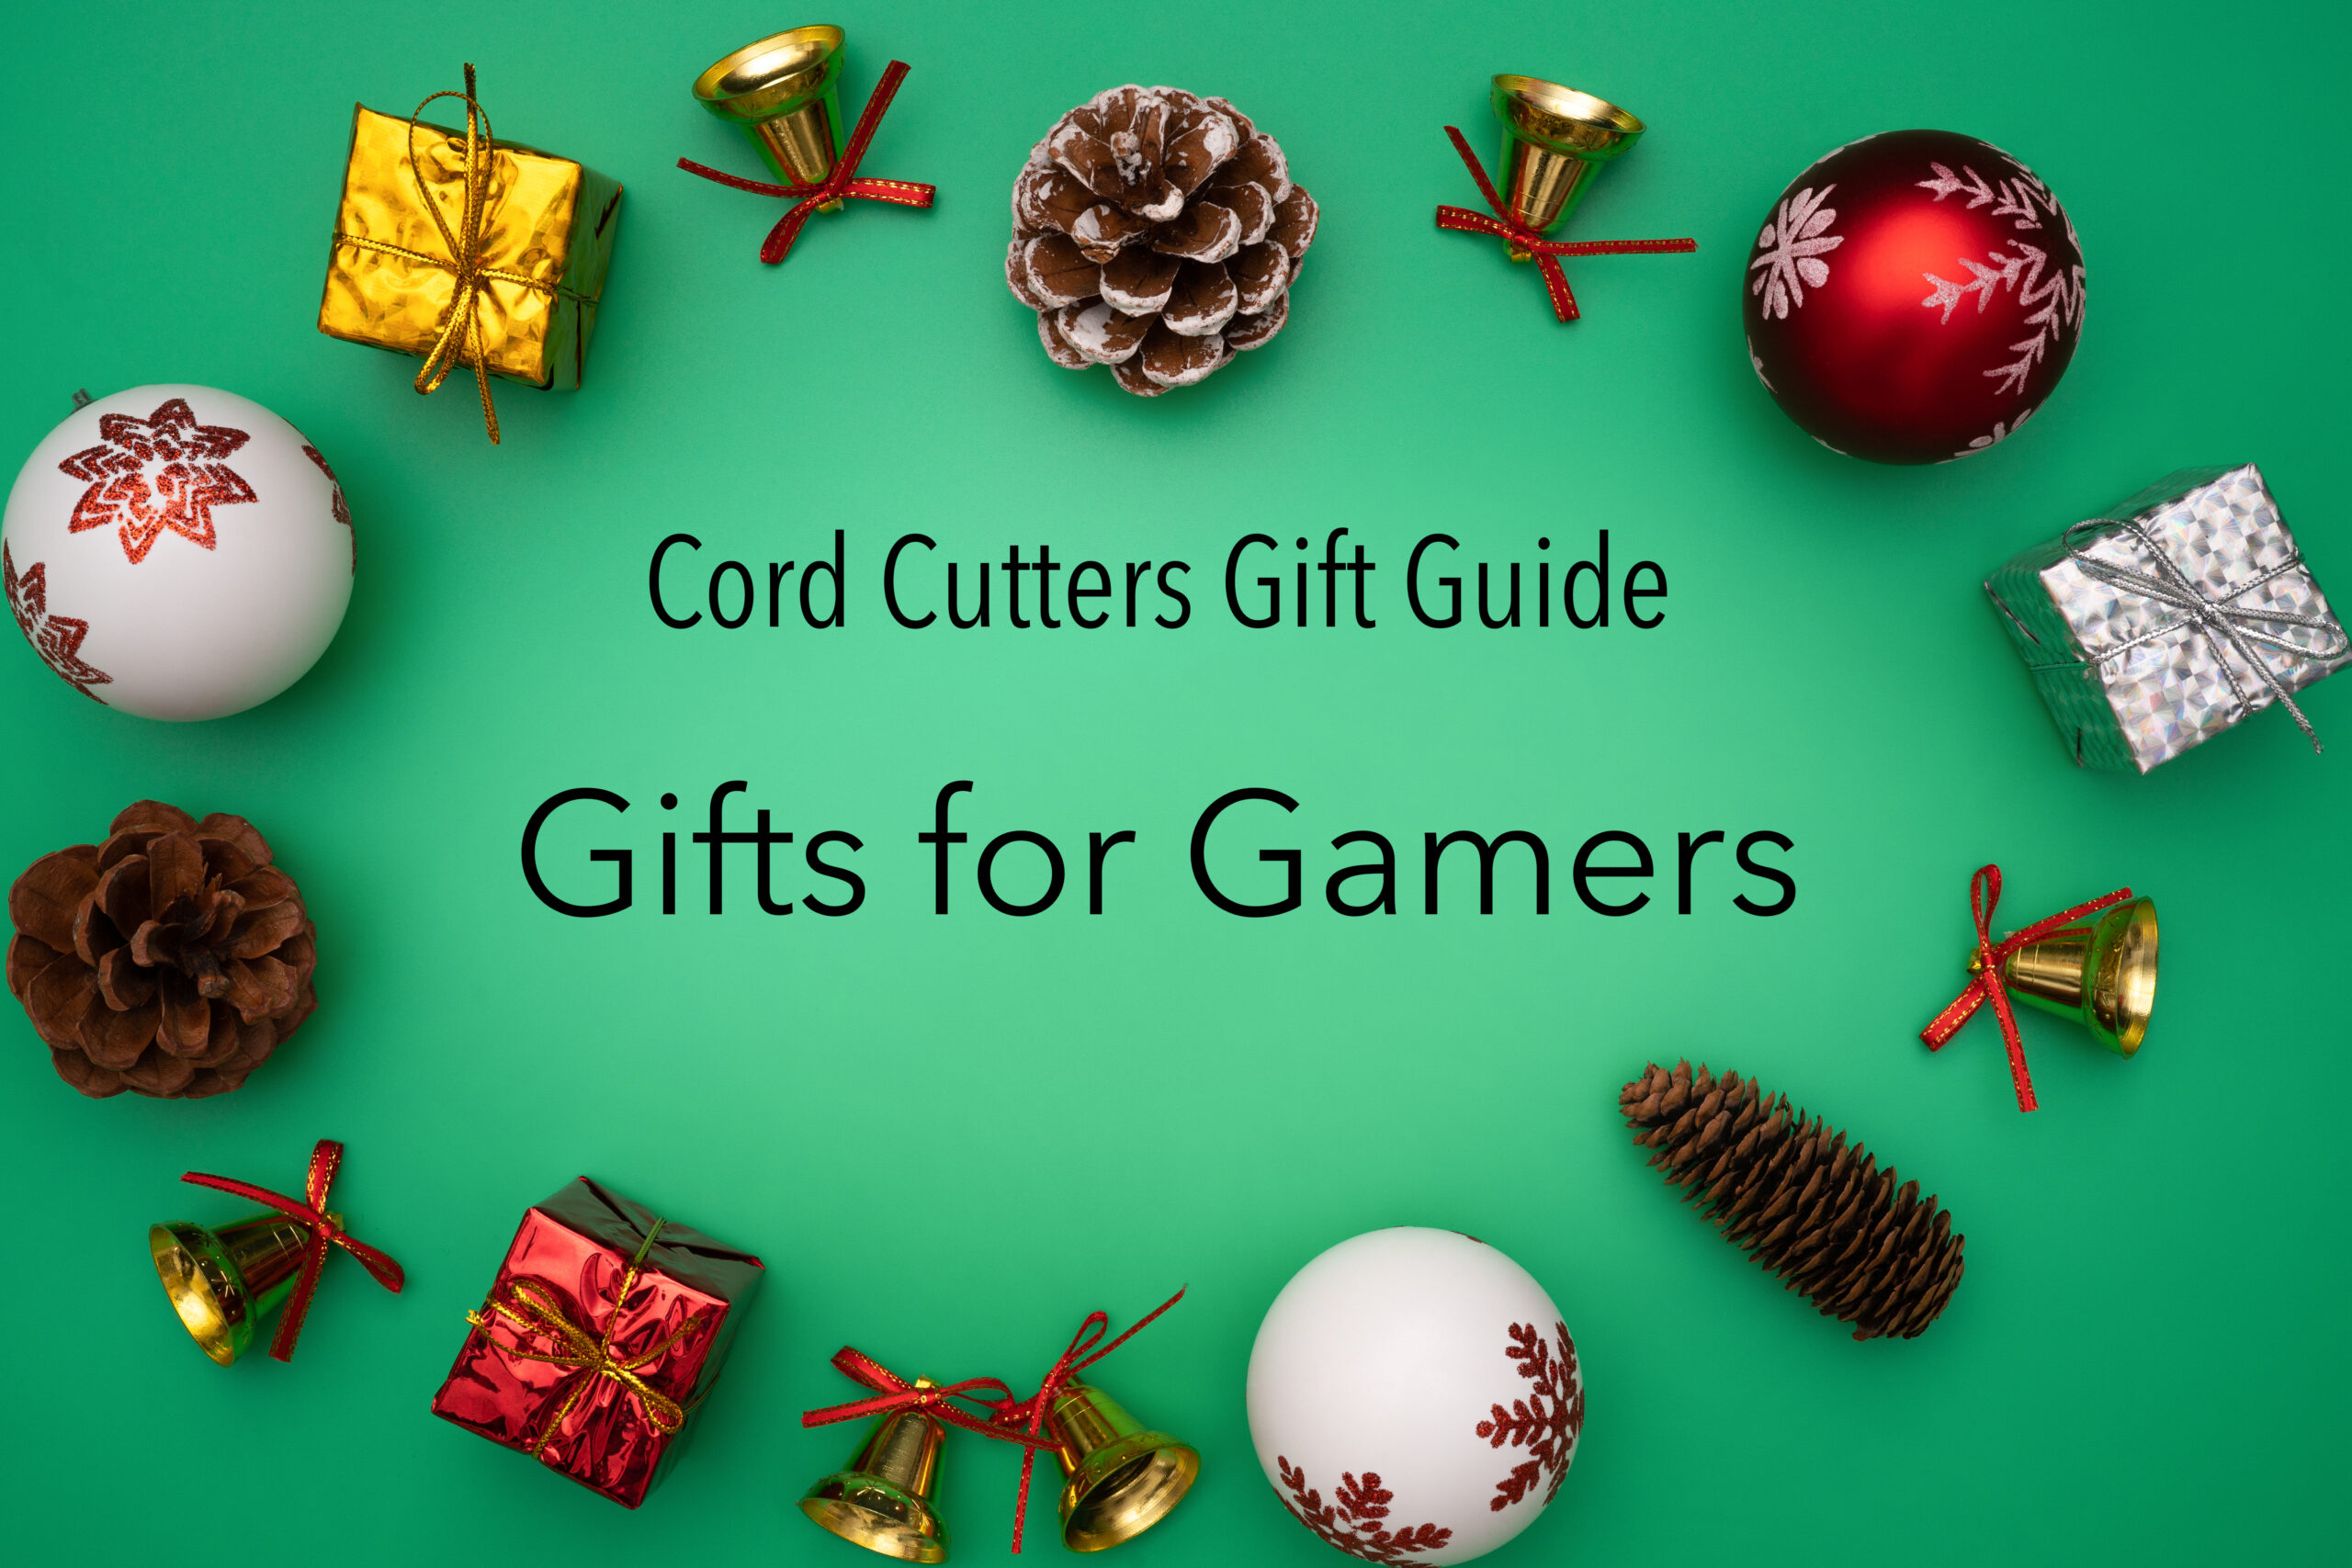 Cord Cutting Gift Guide: Gifts for Gamers